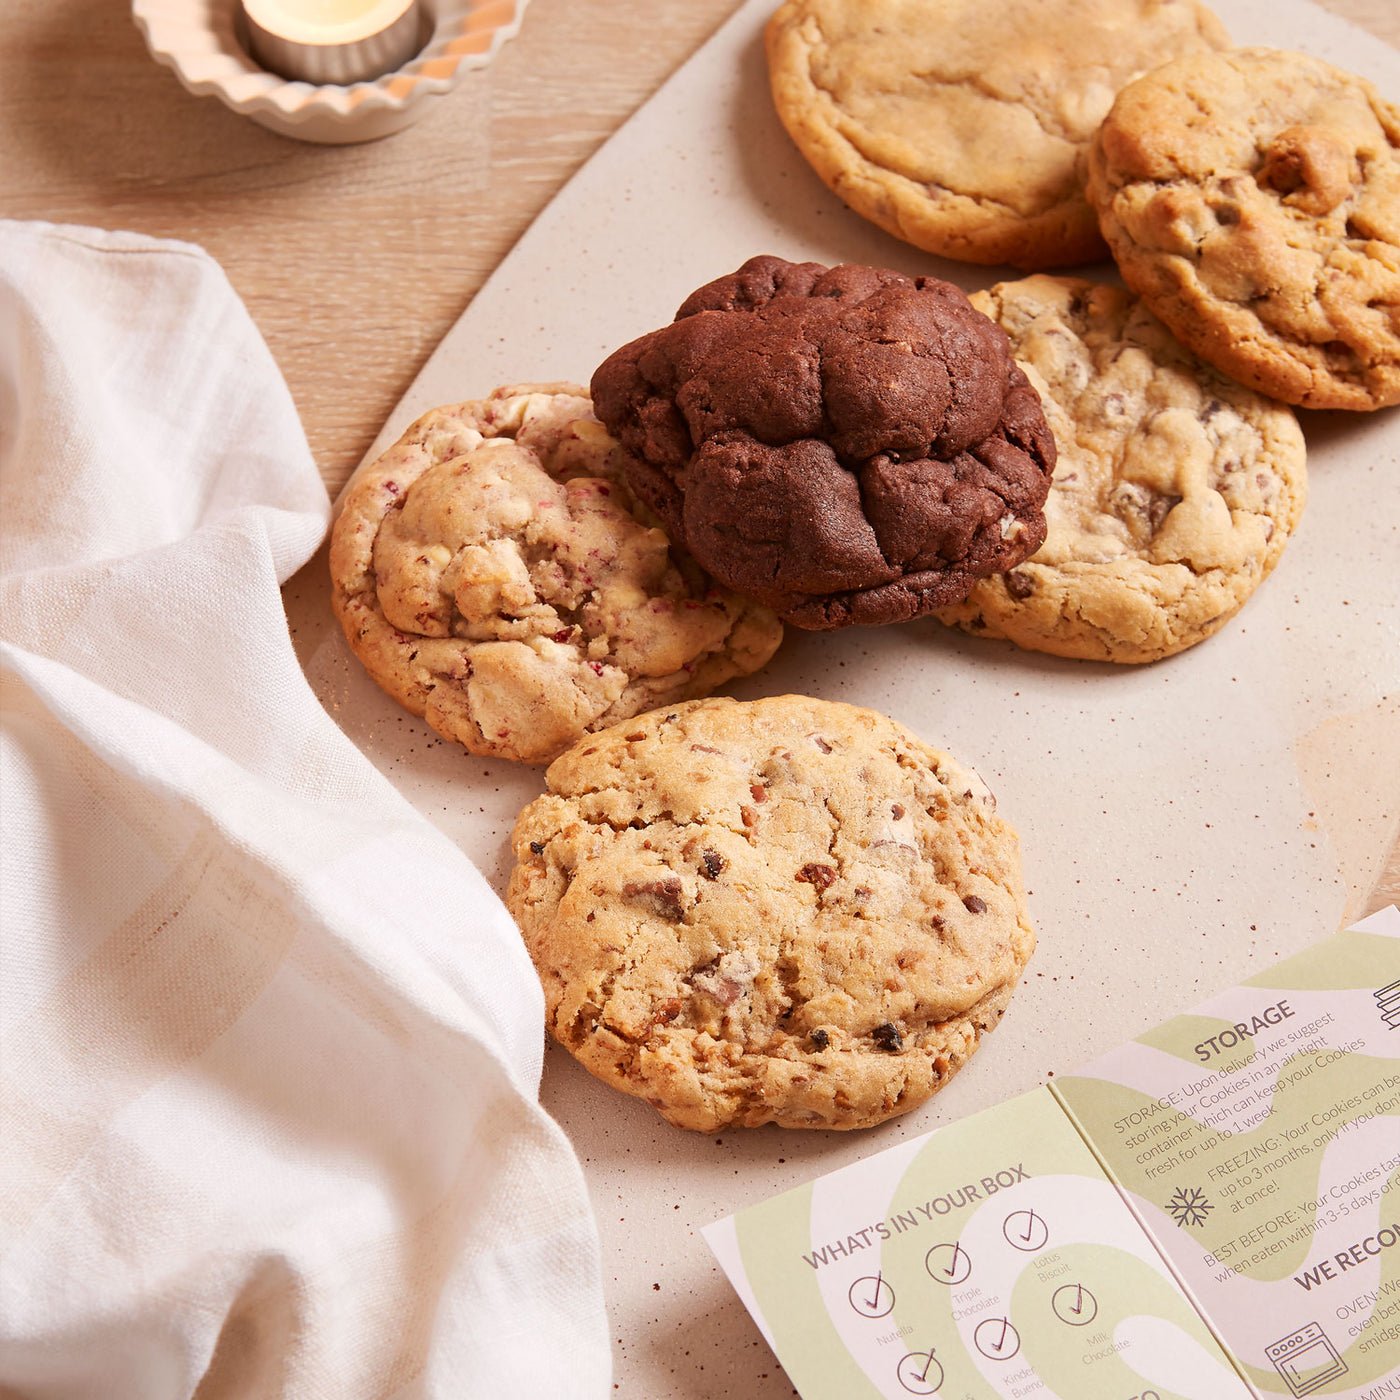 Cookie Delivery Box - Chunky Cookies Delivered To Your Door